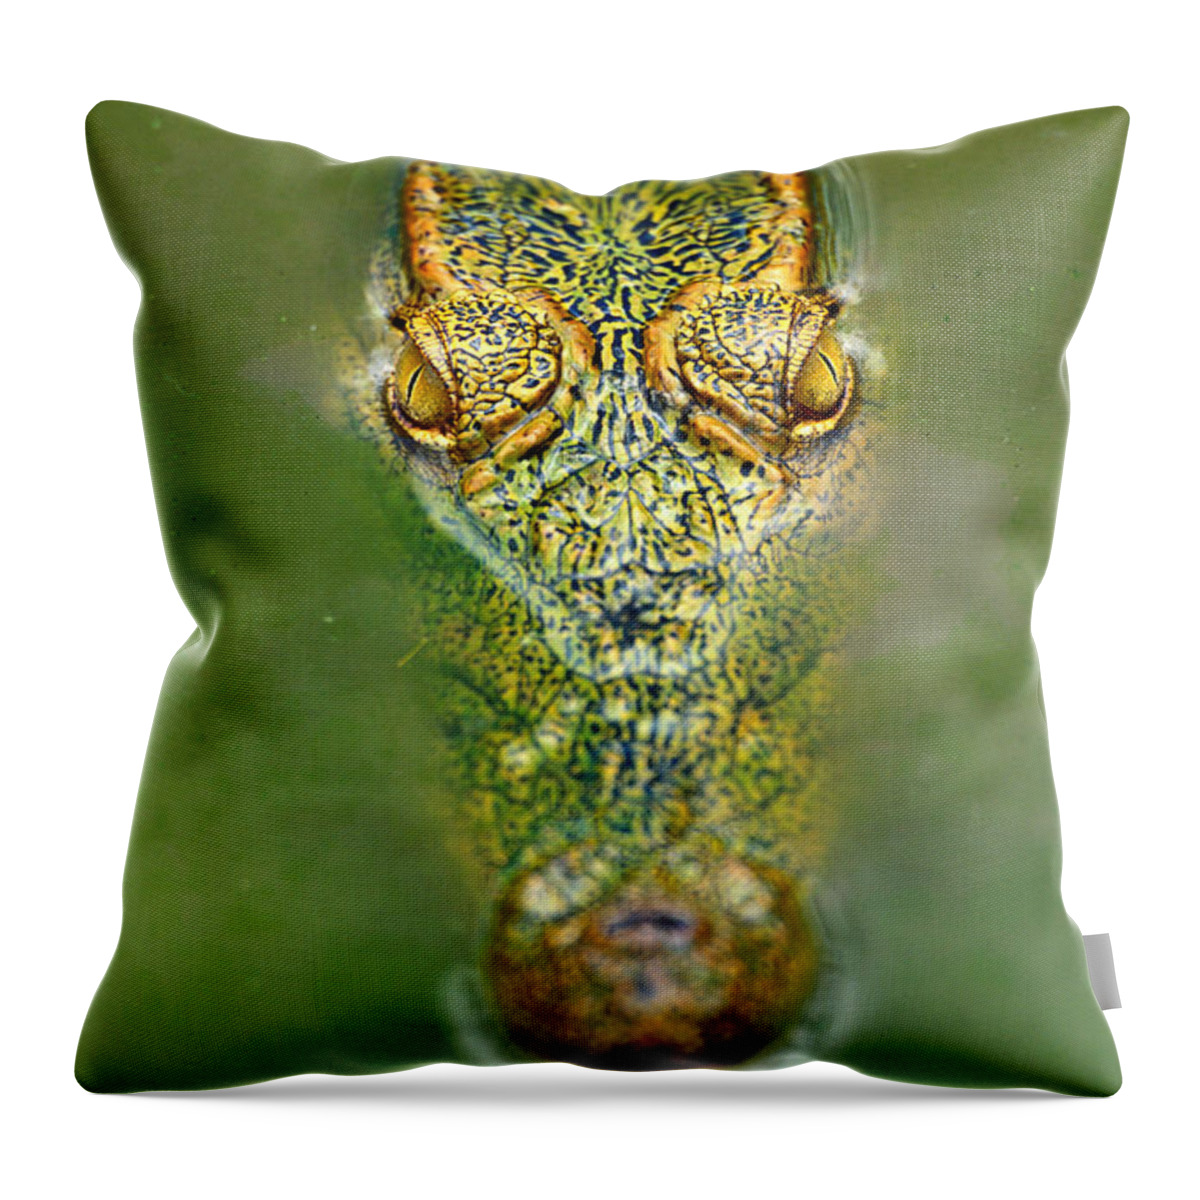 Animal Themes Throw Pillow featuring the photograph Nile Crocodile Crocodylus Niloticus by Art Wolfe